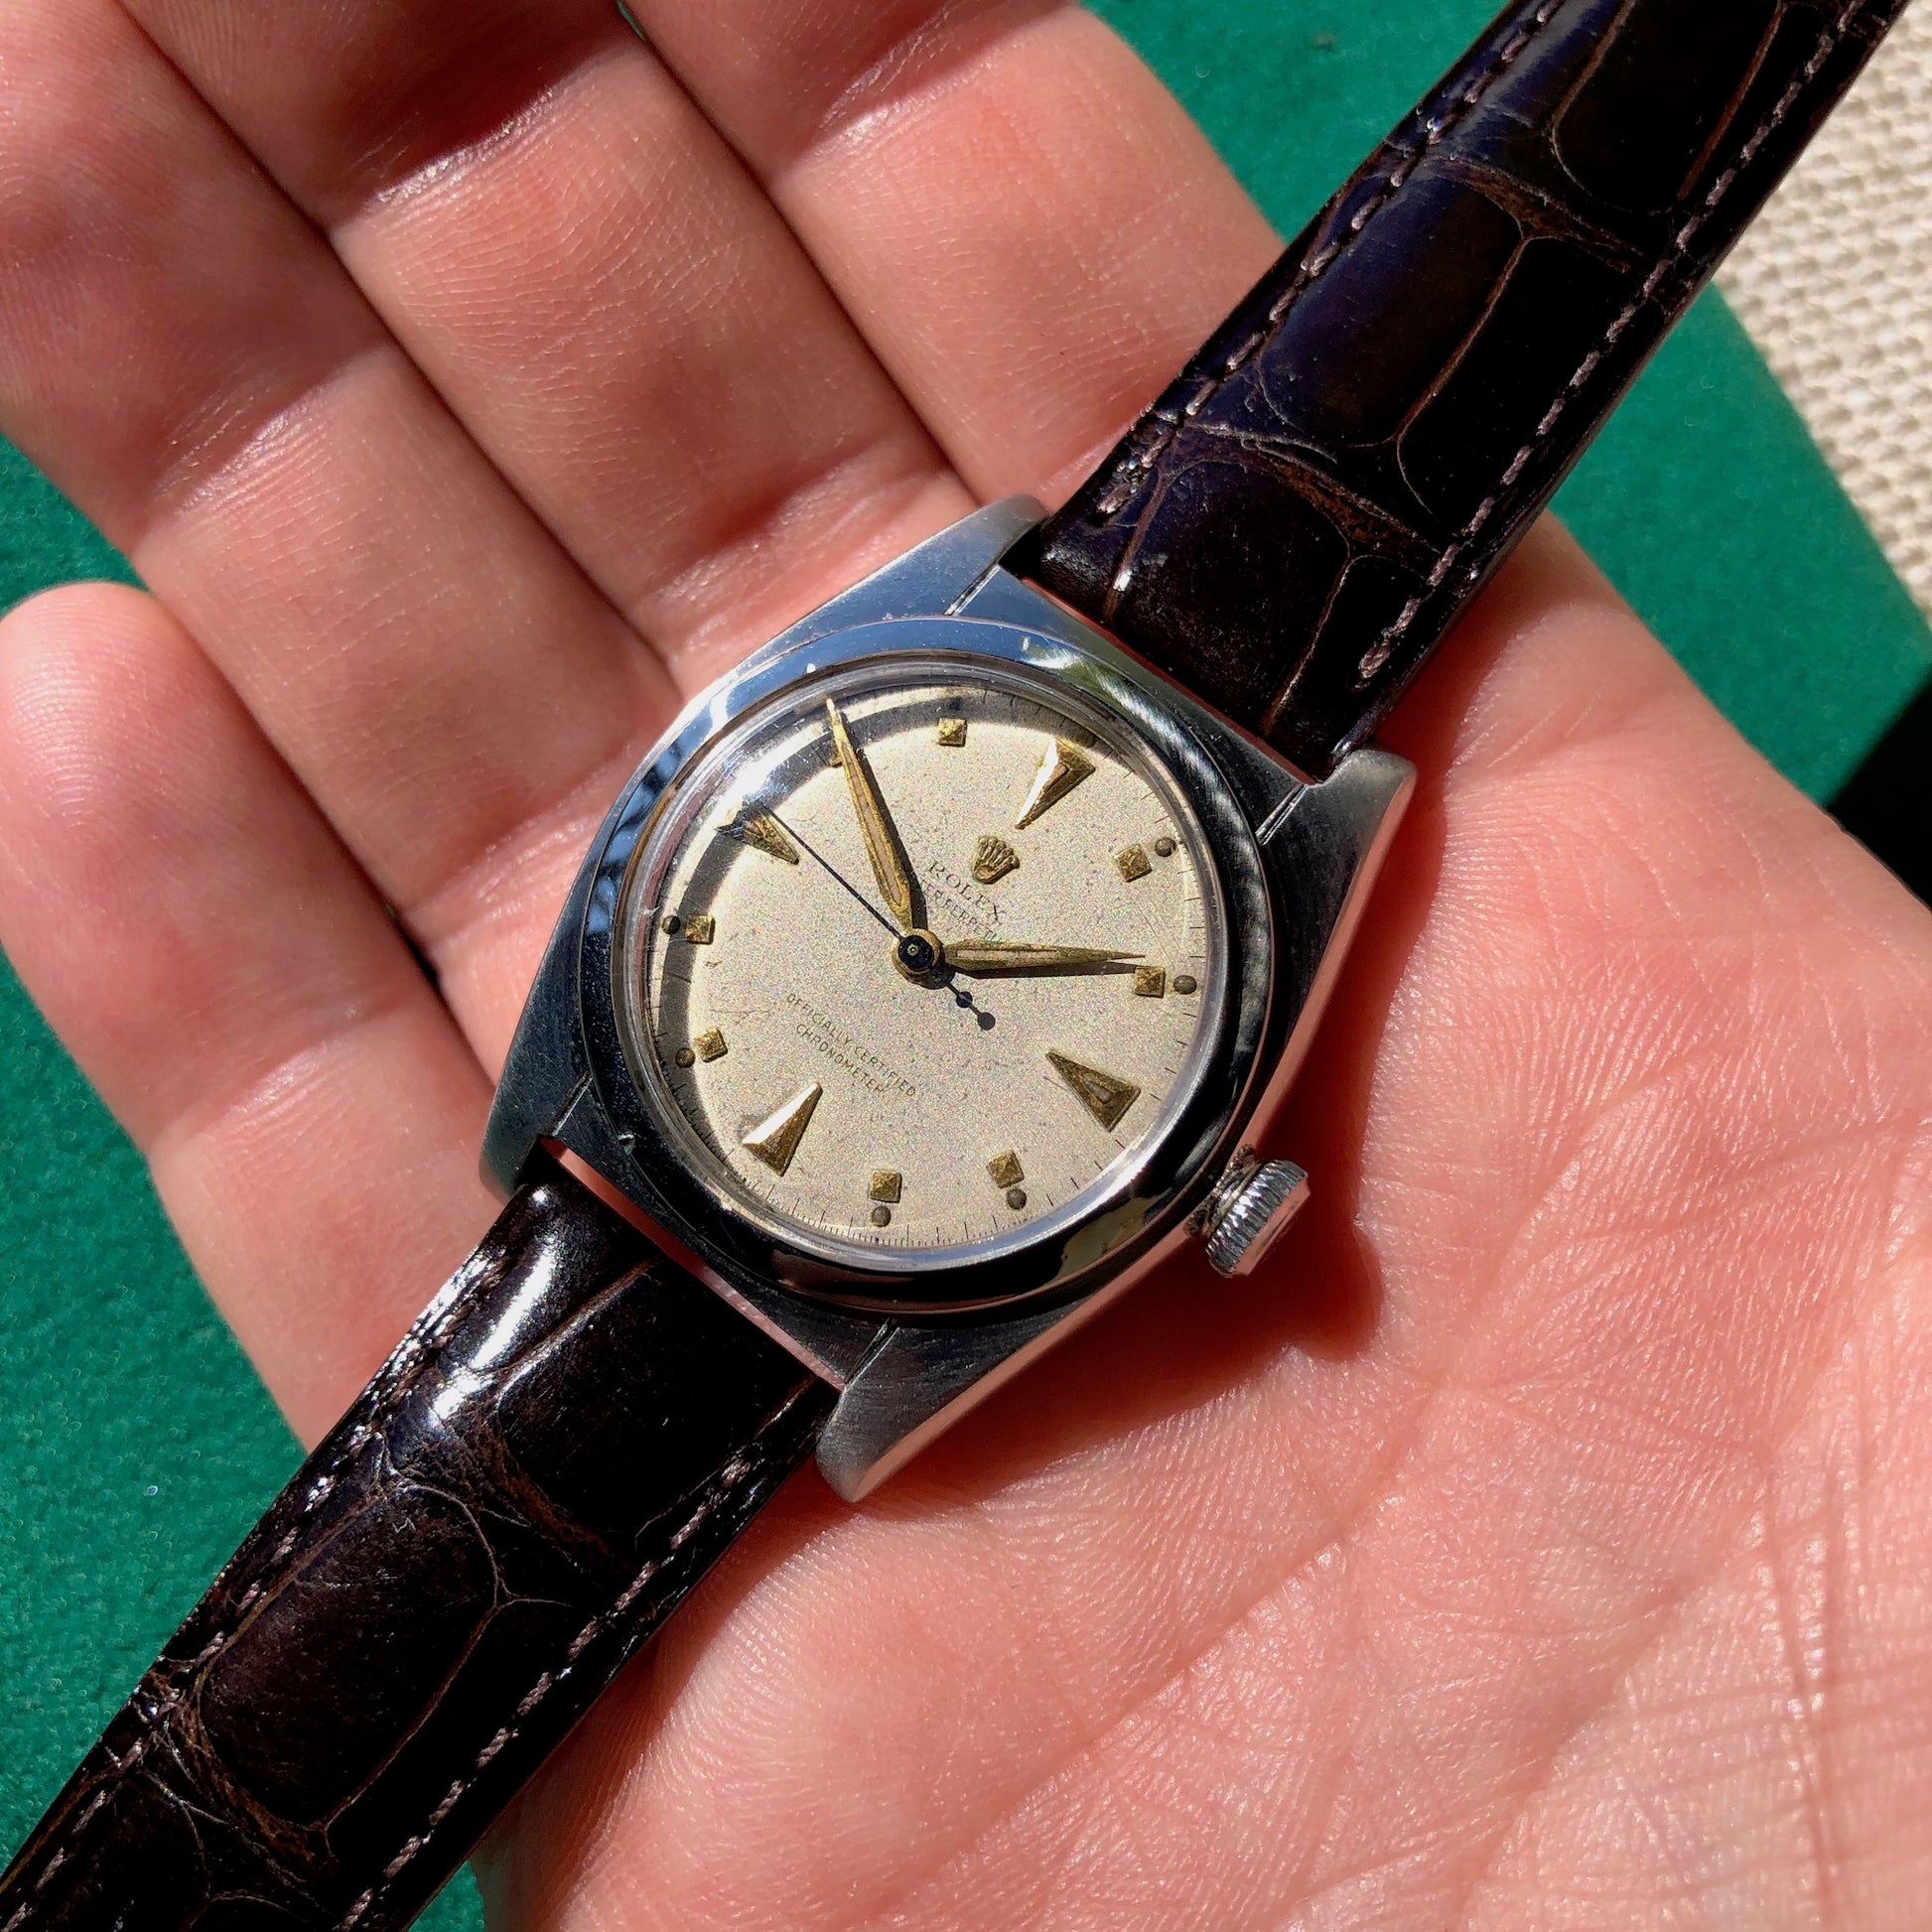 Vintage Rolex Bubbleback 2940 Stainless Steel Automatic Chronometer Watch Circa 1945 - Hashtag Watch Company